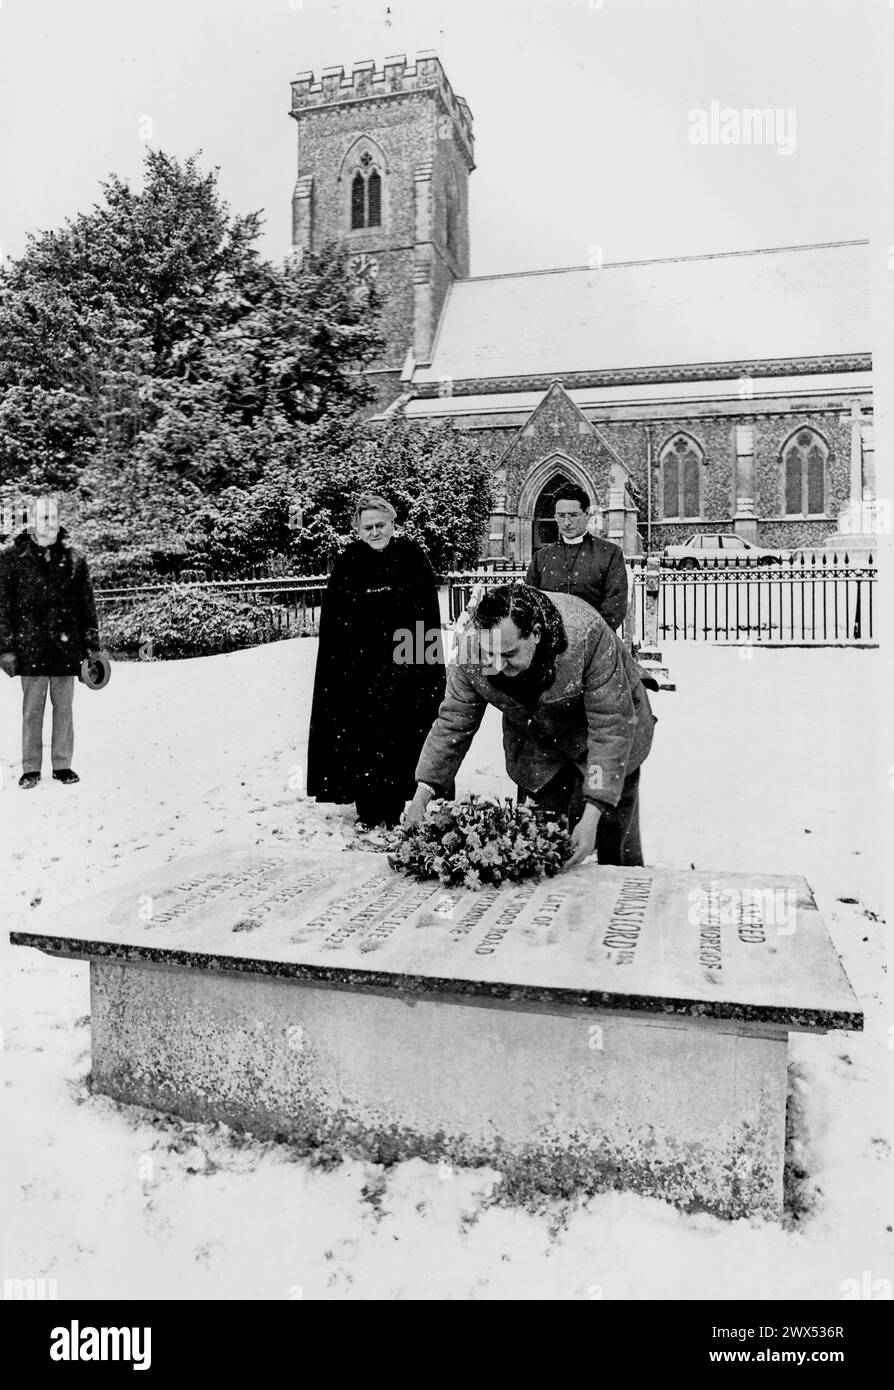 ENGLAND CRICKETER COLIN COWDRAY LAYS WREATH ON THE GRAVE OFD THOMAS LORD FOUNDER OF LORDS CRICKET GROUND AT ST JOHN'S CHURCH , WEST MEON, HANTS. PIC MIKE WALKER 1987 Stock Photo